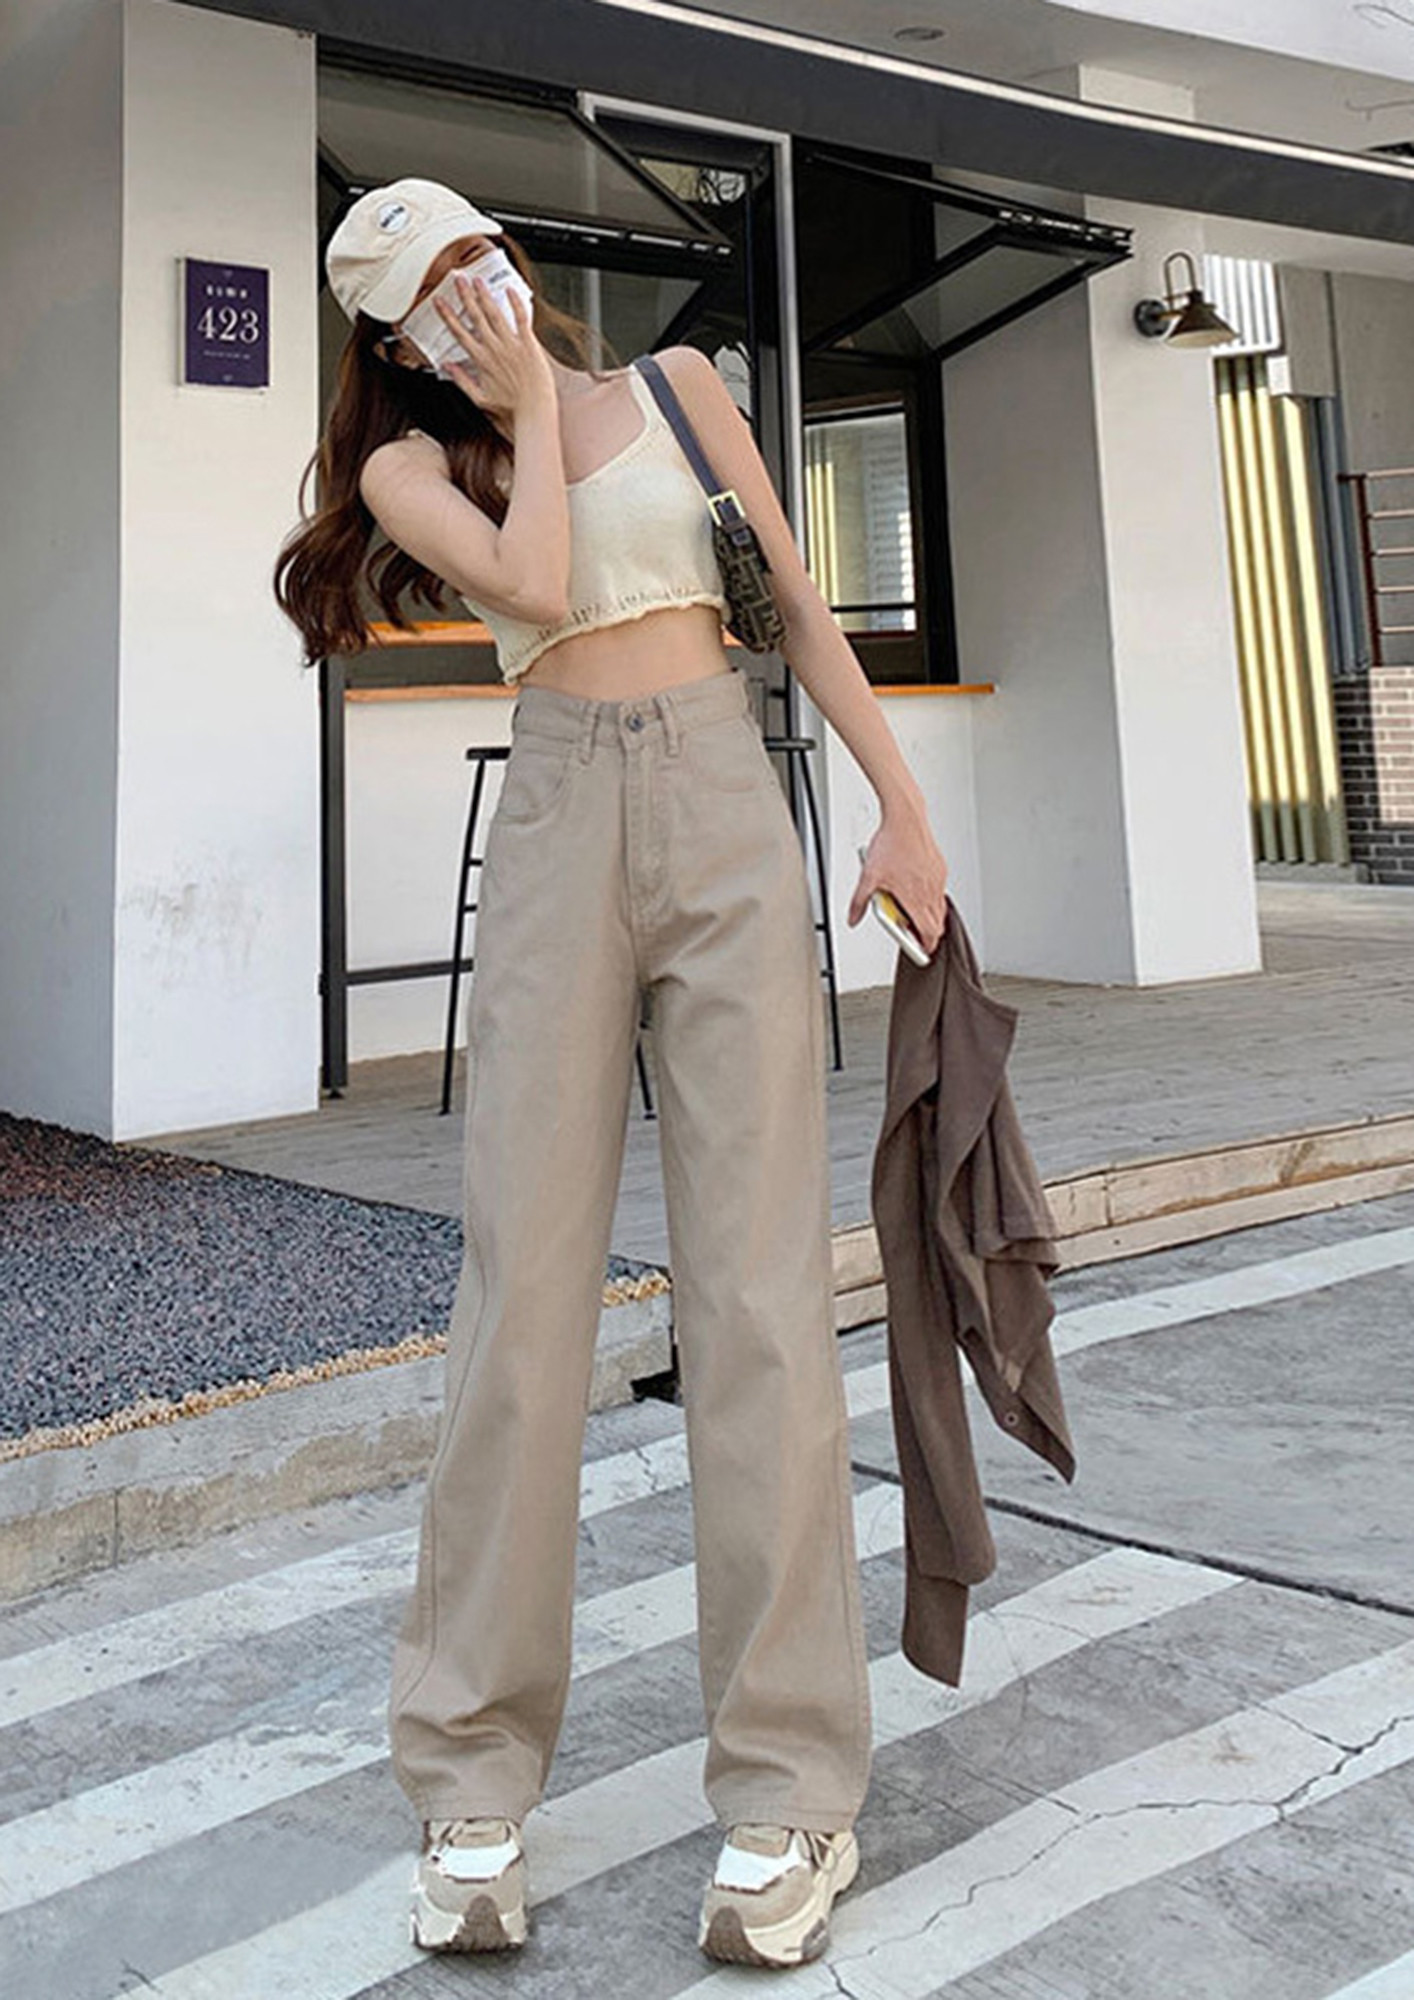 drppepioner Women'S Fashion Casual Full-Length Loose Pants Solid High Waist Trousers  Long Straight Wide Leg Pants 